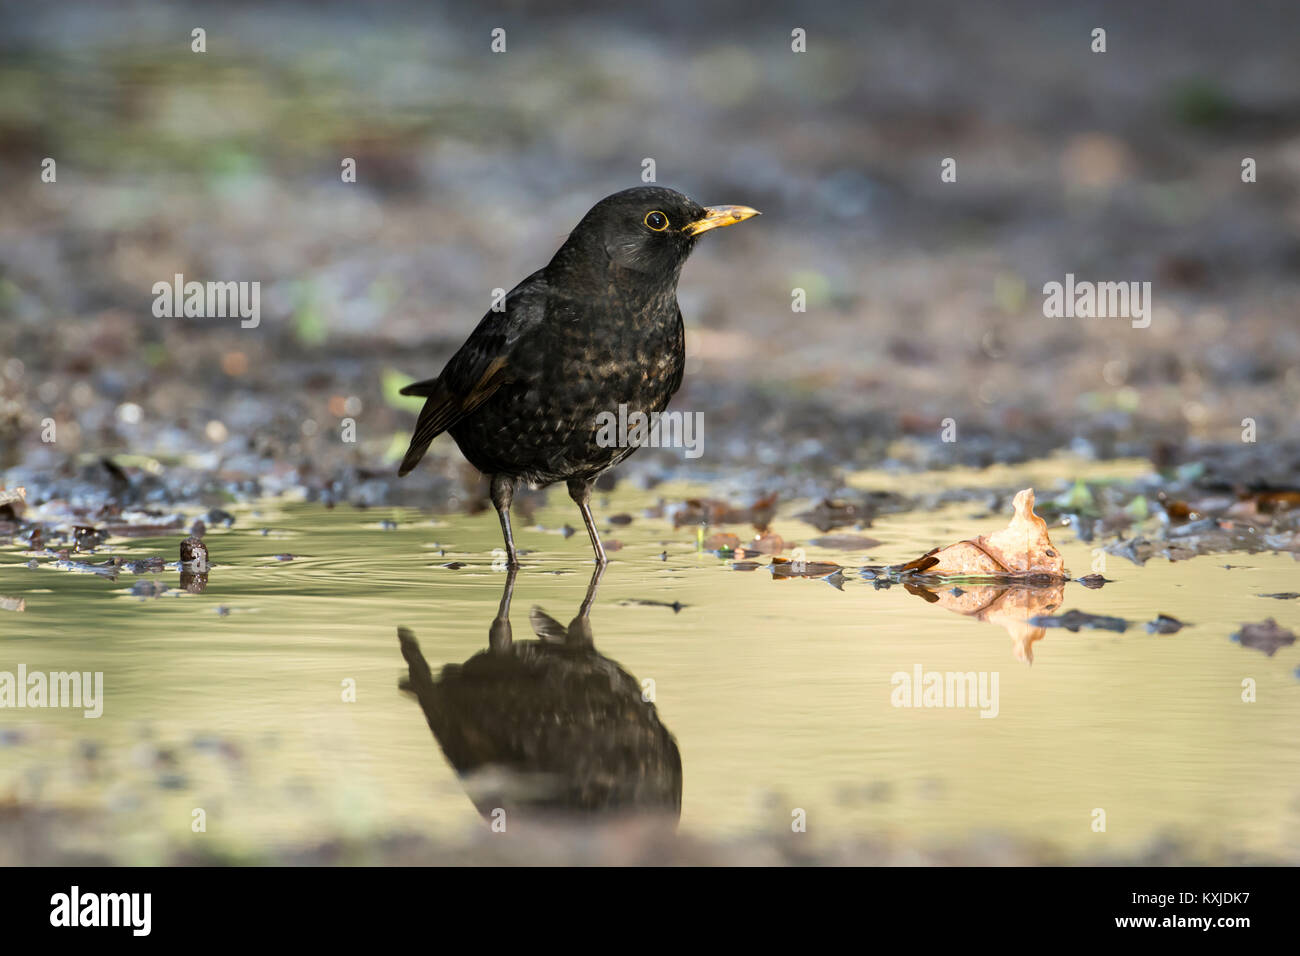 Young male blackbird (Turdus merula) in a puddle. The bird is moulting into adult plumage. Stock Photo